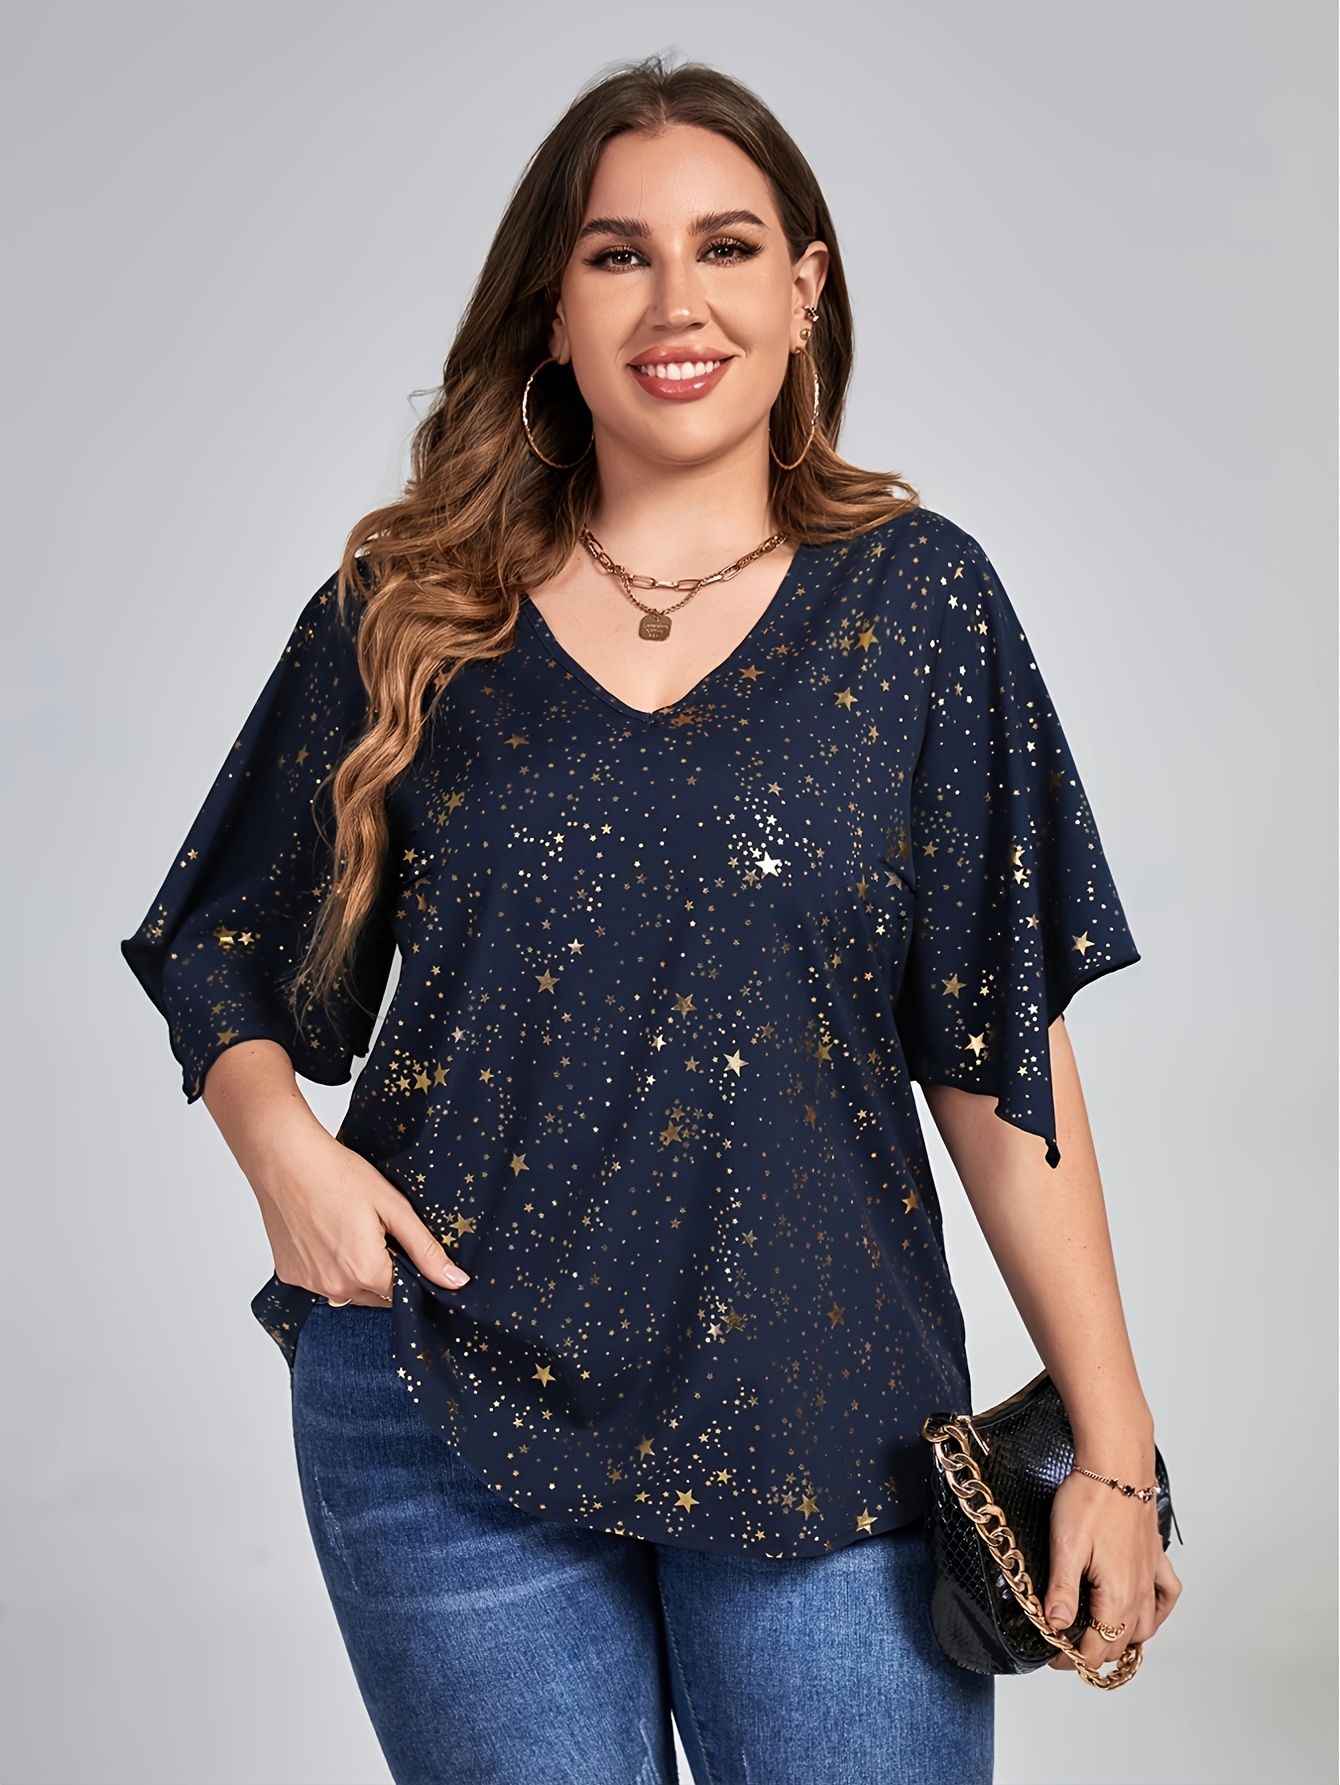 Plus Size Clothes For Women, Basics Womens Clothing Sparkly Tops